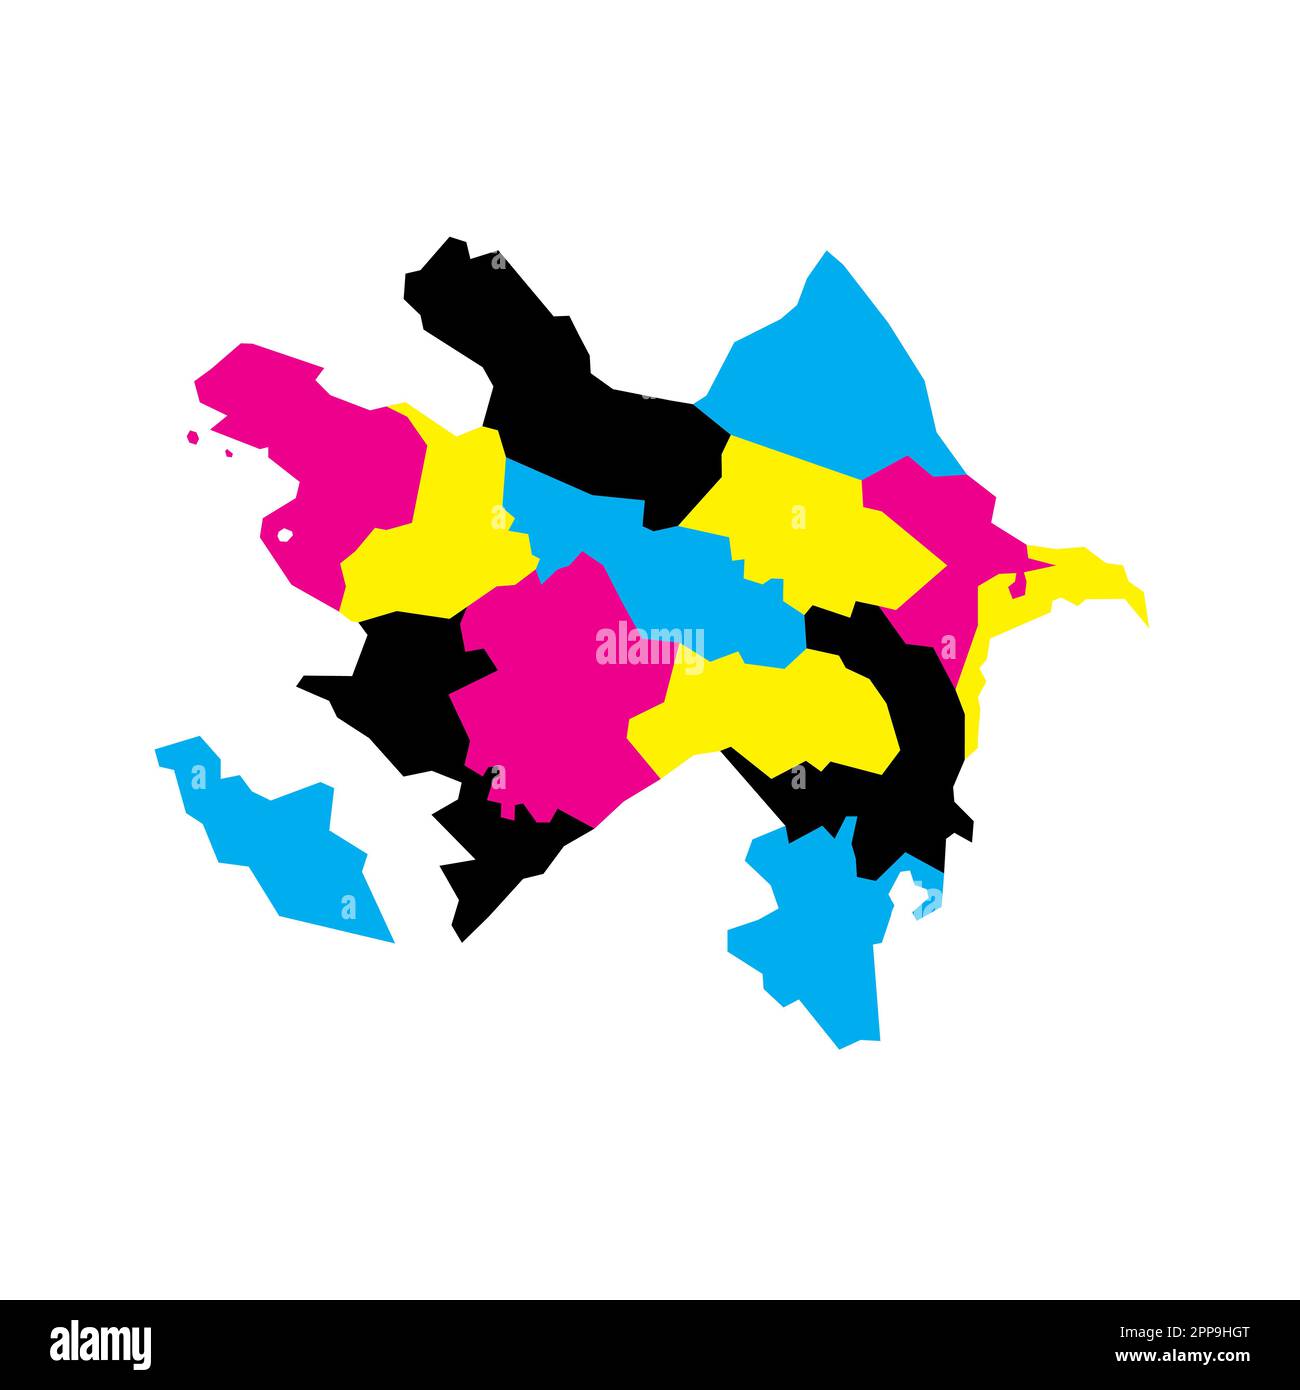 Azerbaijan political map of administrative divisions - districts, cities and autonomous republic of Nakhchivan. Blank vector map in CMYK colors. Stock Vector